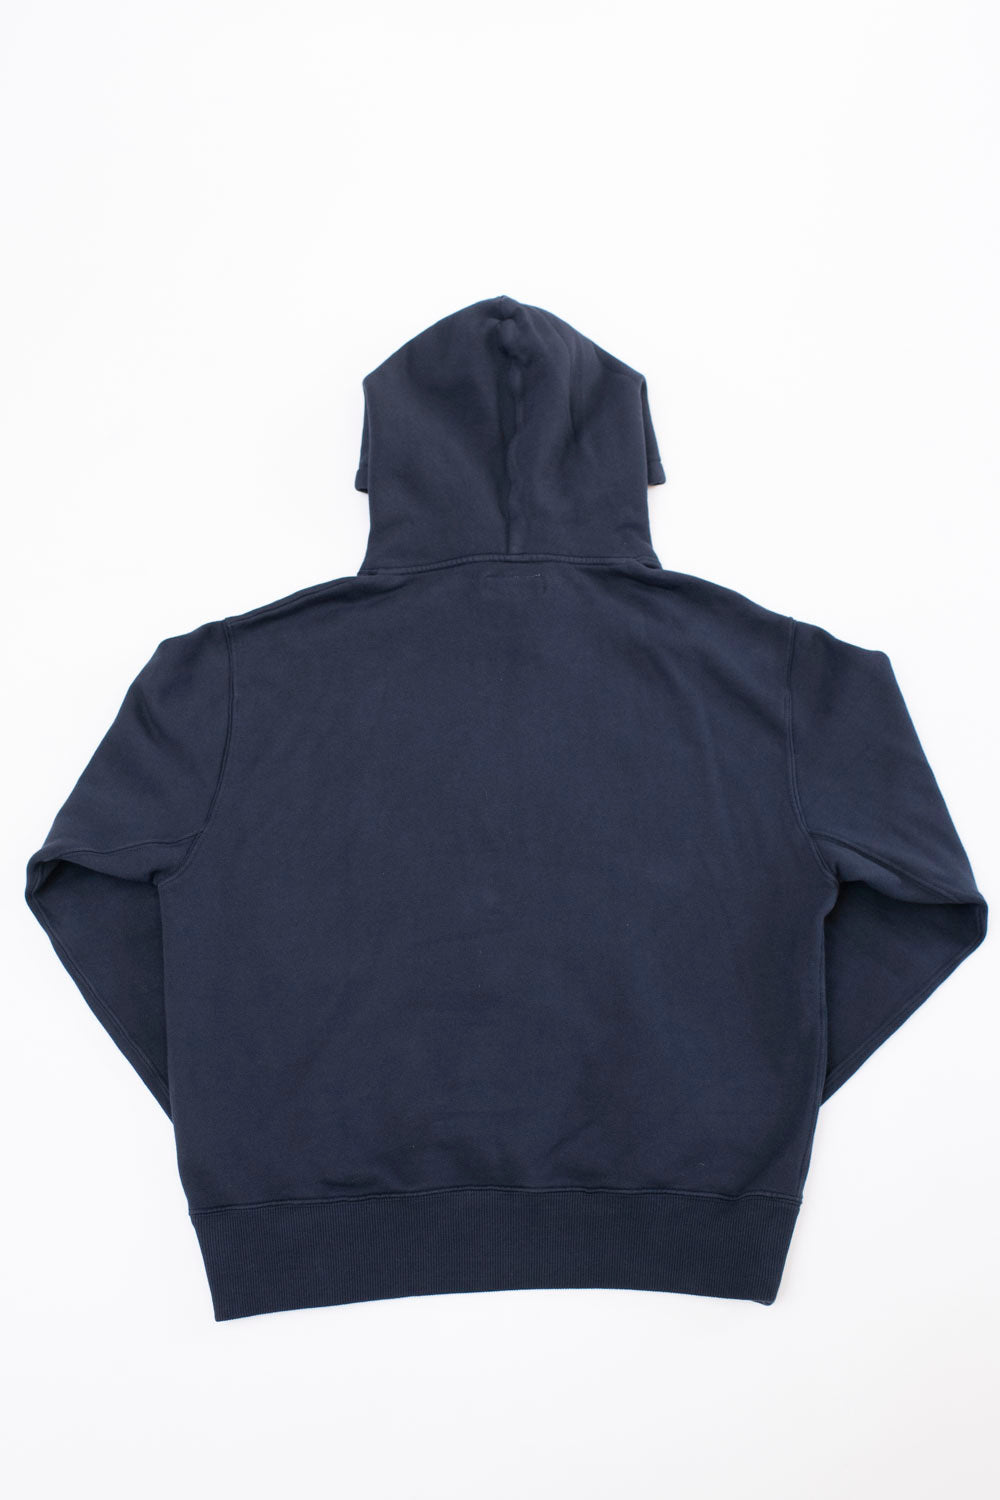 HD31.98 - 13oz Athletic Hoodie Relaxed Fit - Charcoal